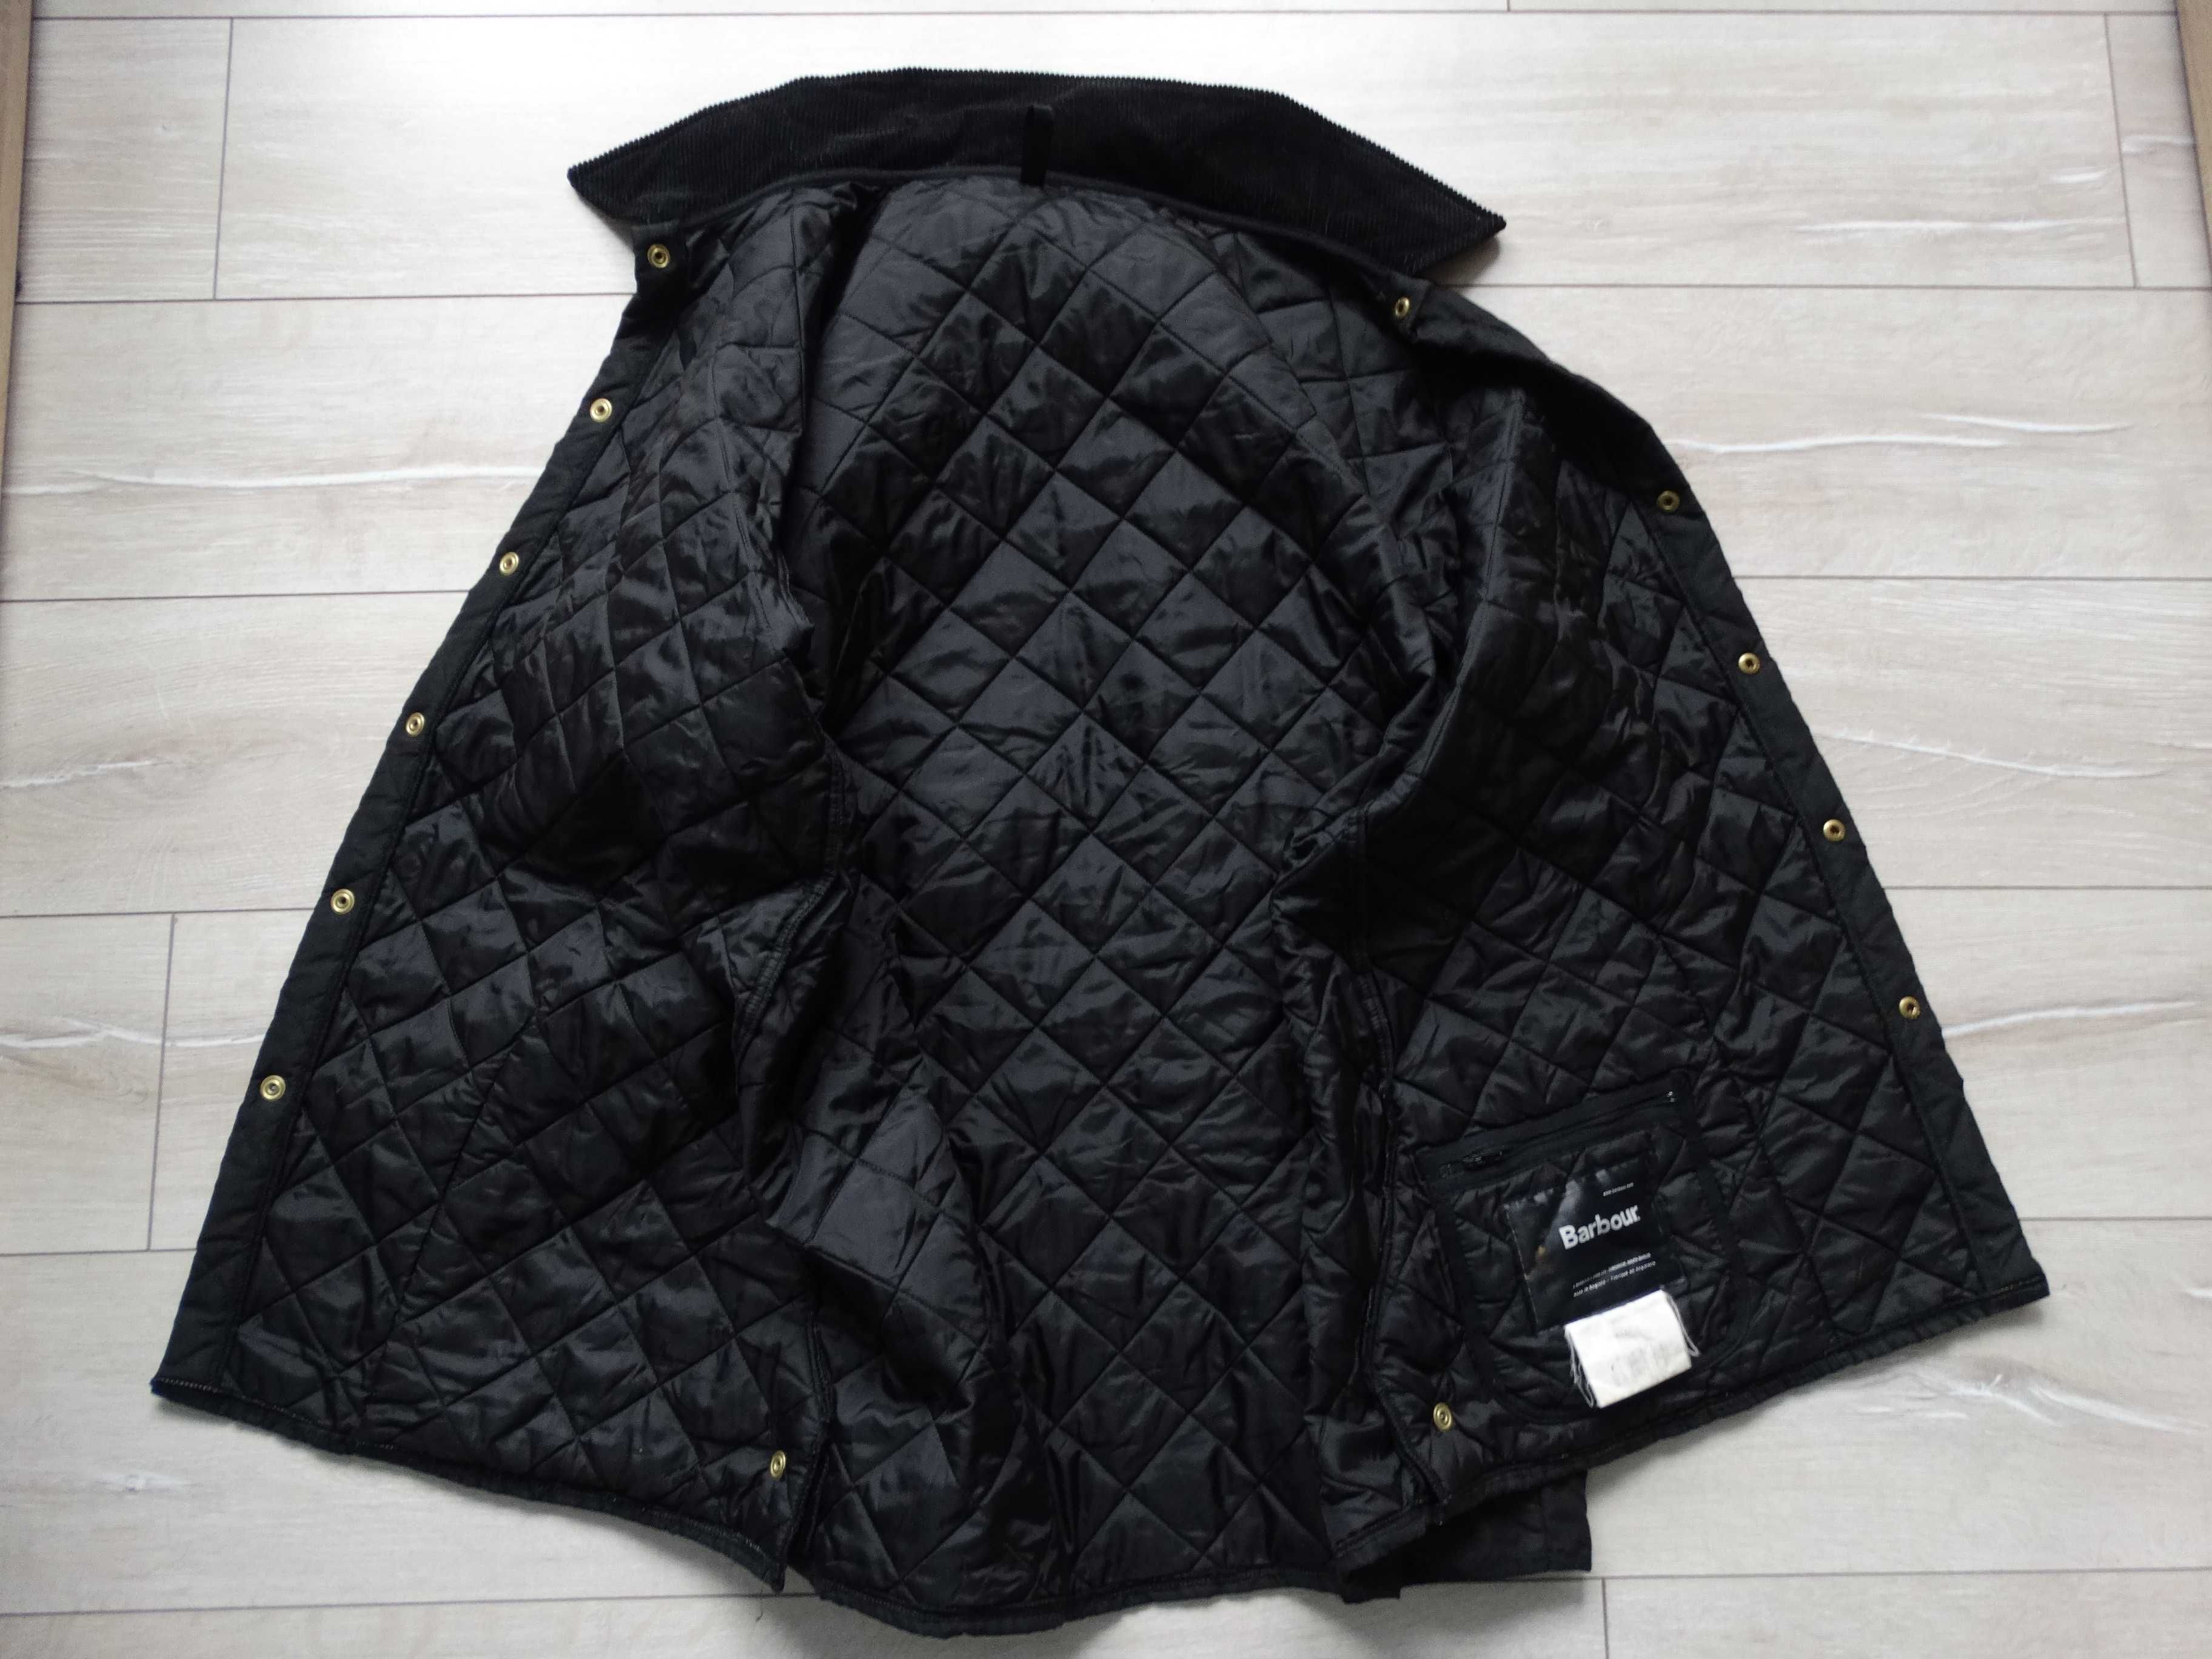 Barbour Eskdale Quilted Jacket мъжко яке размер XL